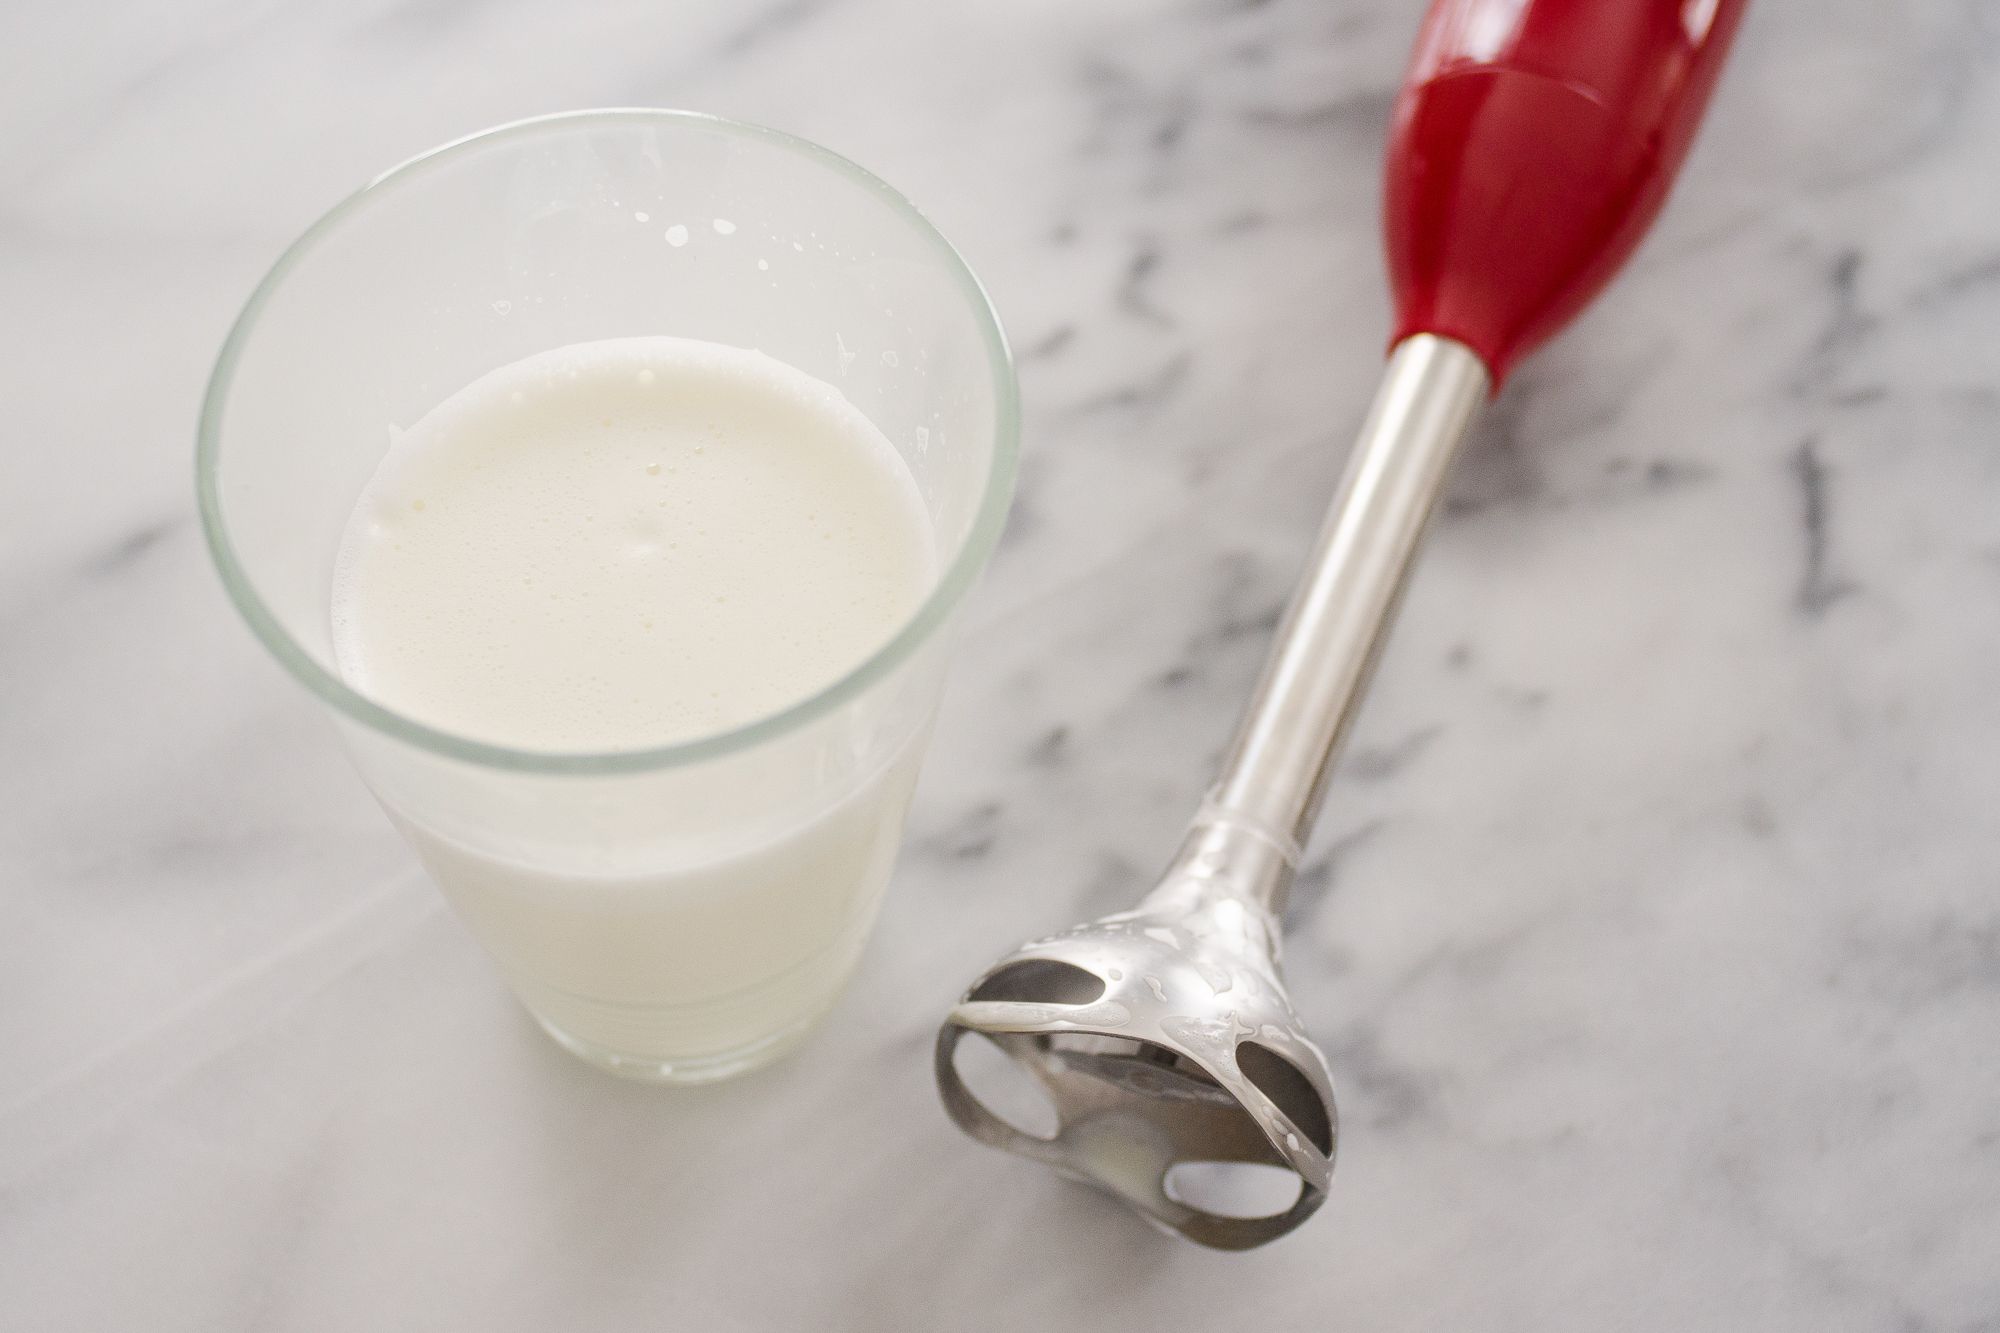 How to Froth Milk (with or without a frother)